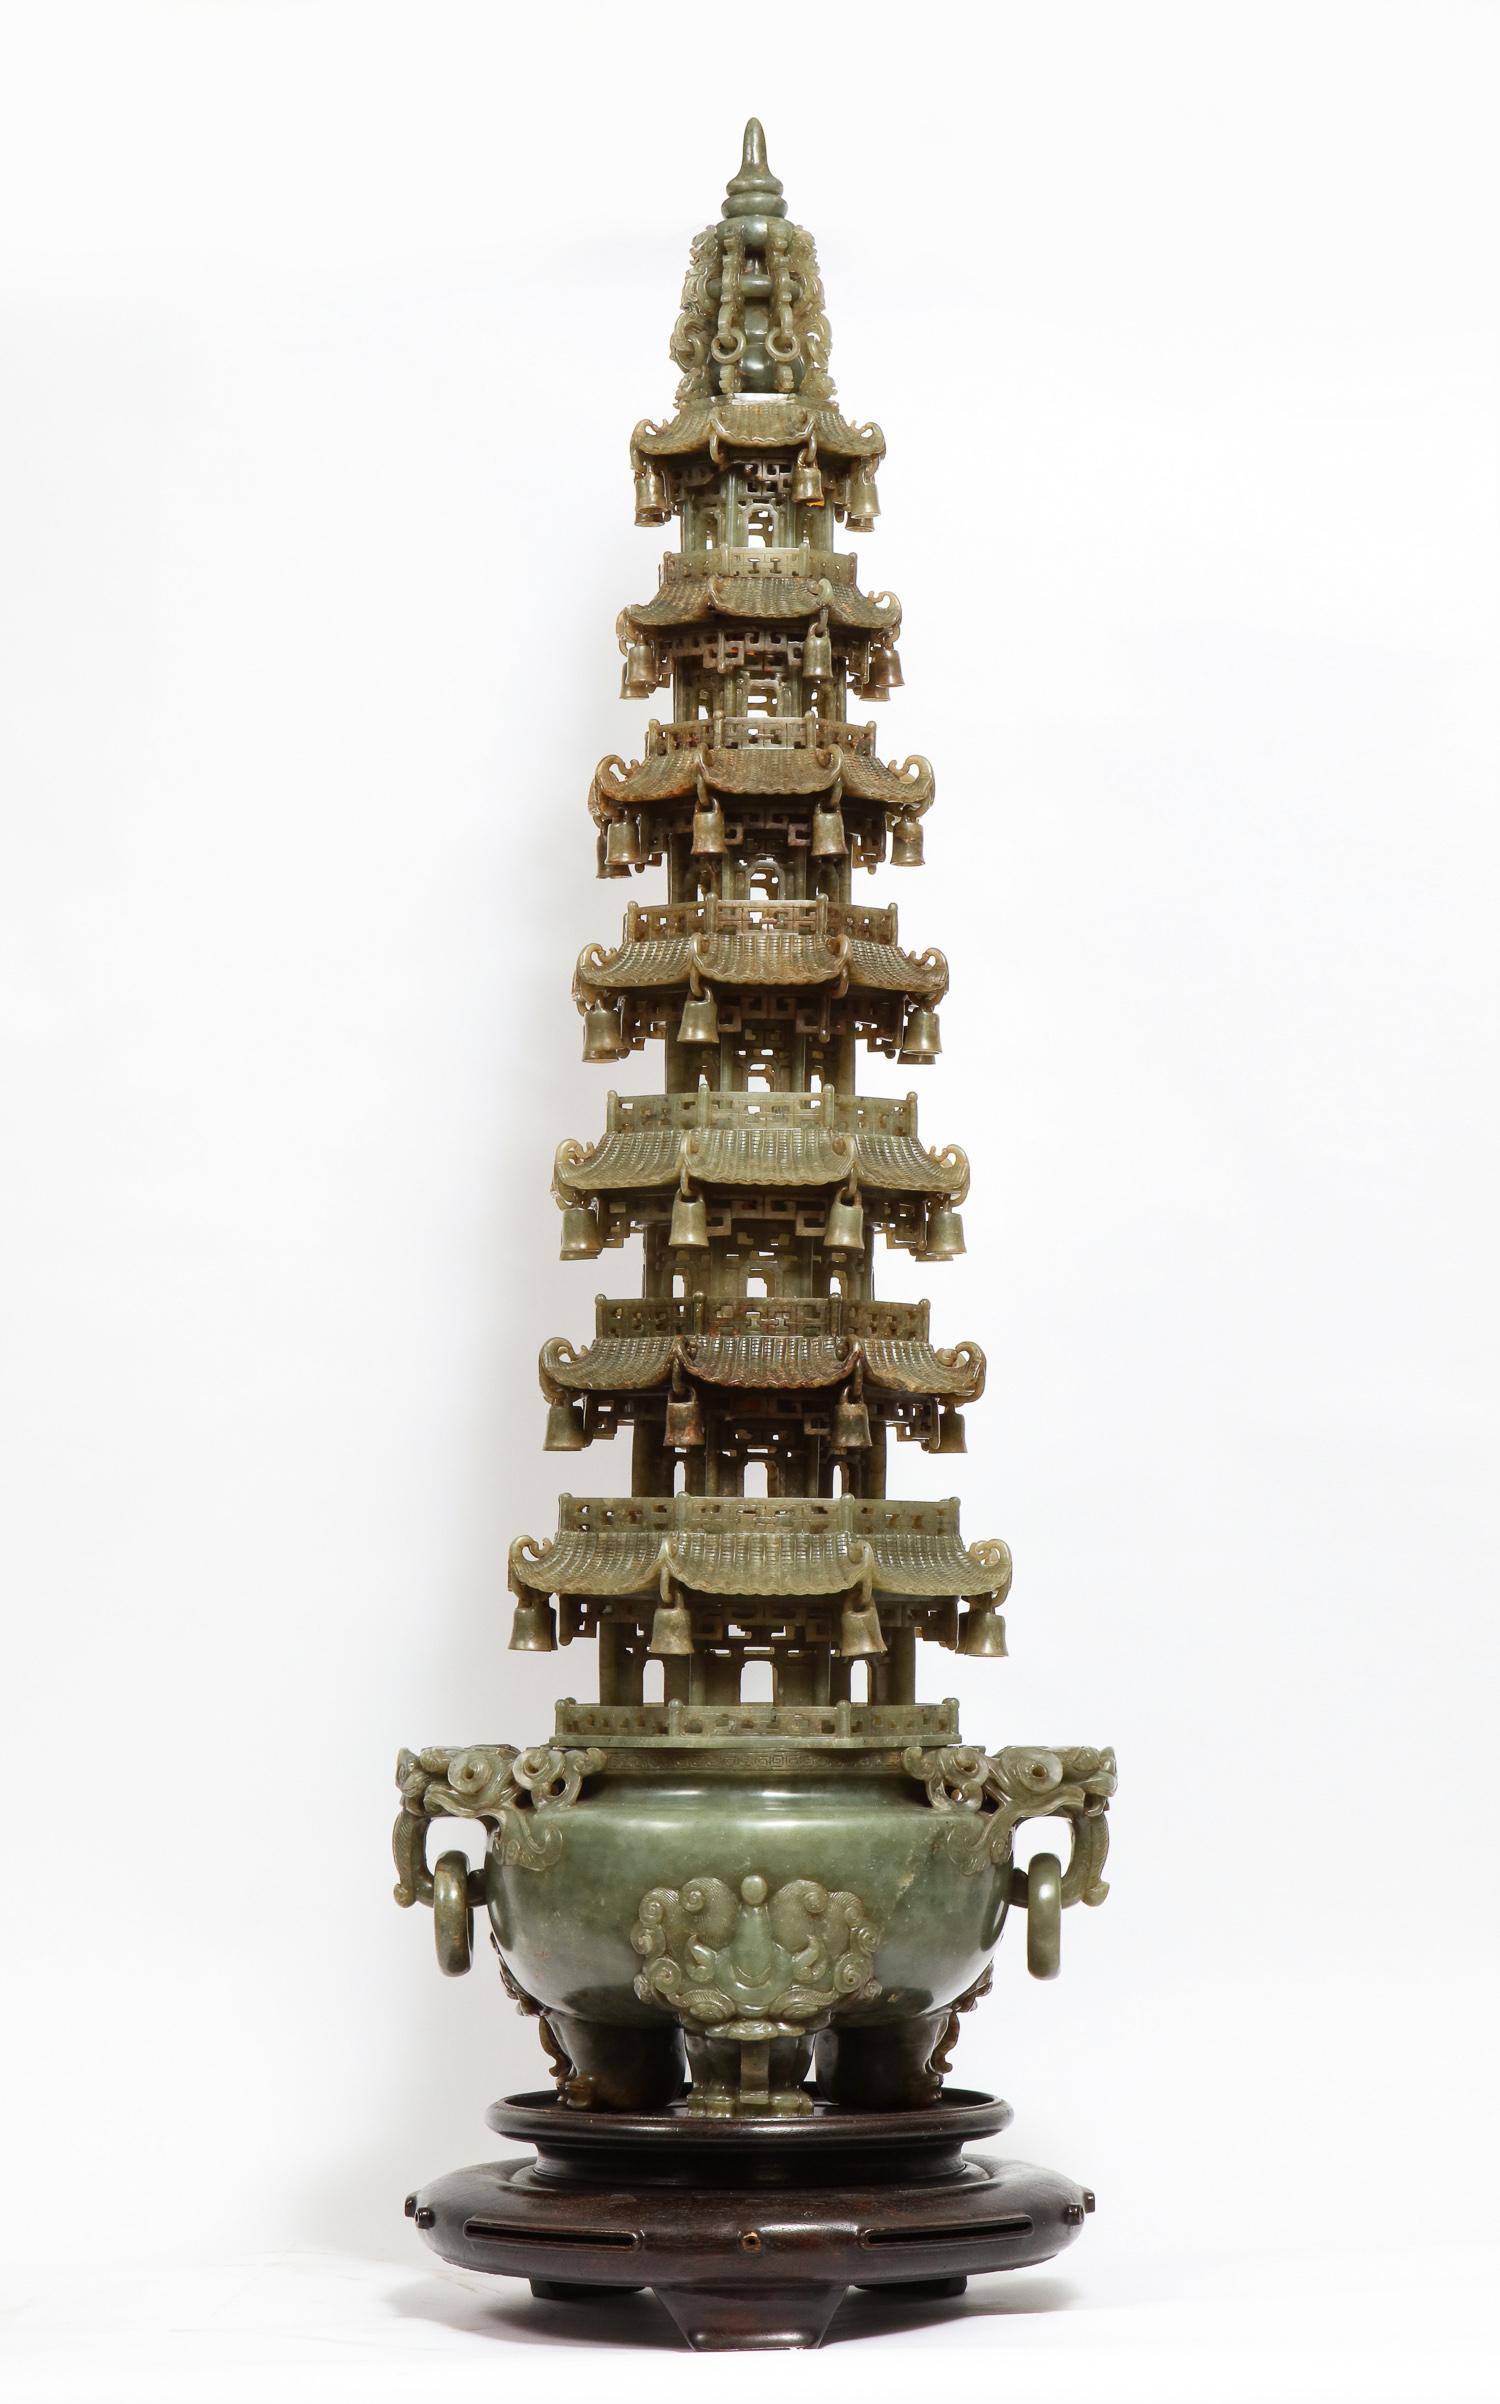 Monumental Chinese serpentine jade carved pagoda censer, early 20th century.

A masterfully carved Chinese serpentine pagoda censer. The base of the tripod censer is set upon lion-headed paw feet. Two loose ring handles hang from the mouths of